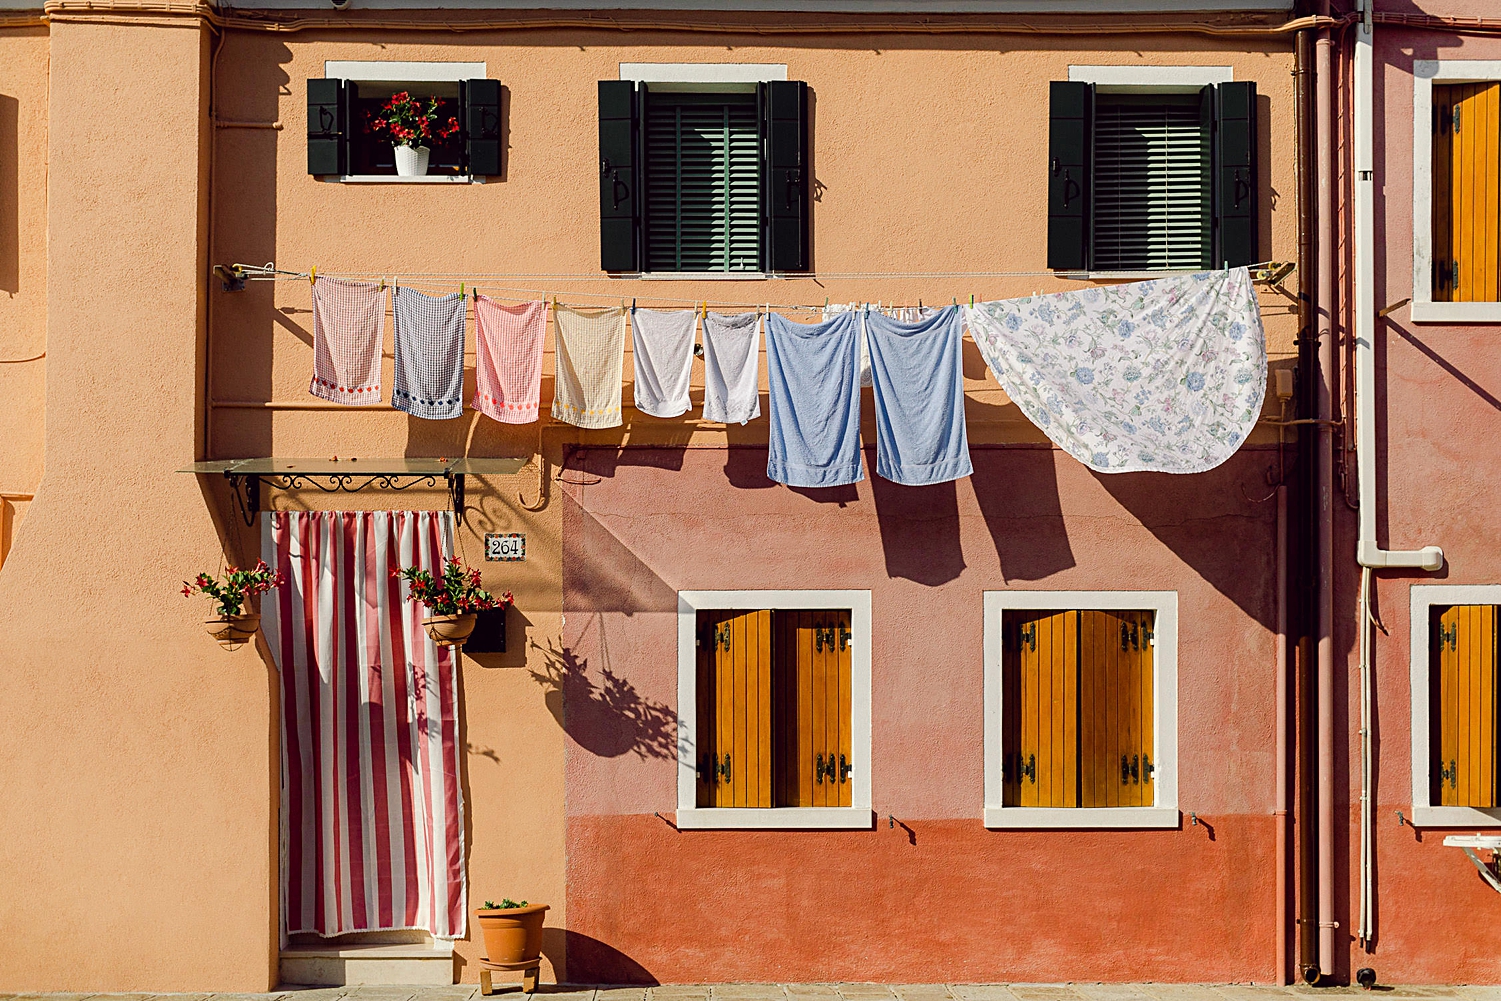 facade of orange two story home in Burano Italy with line of laundry hanging